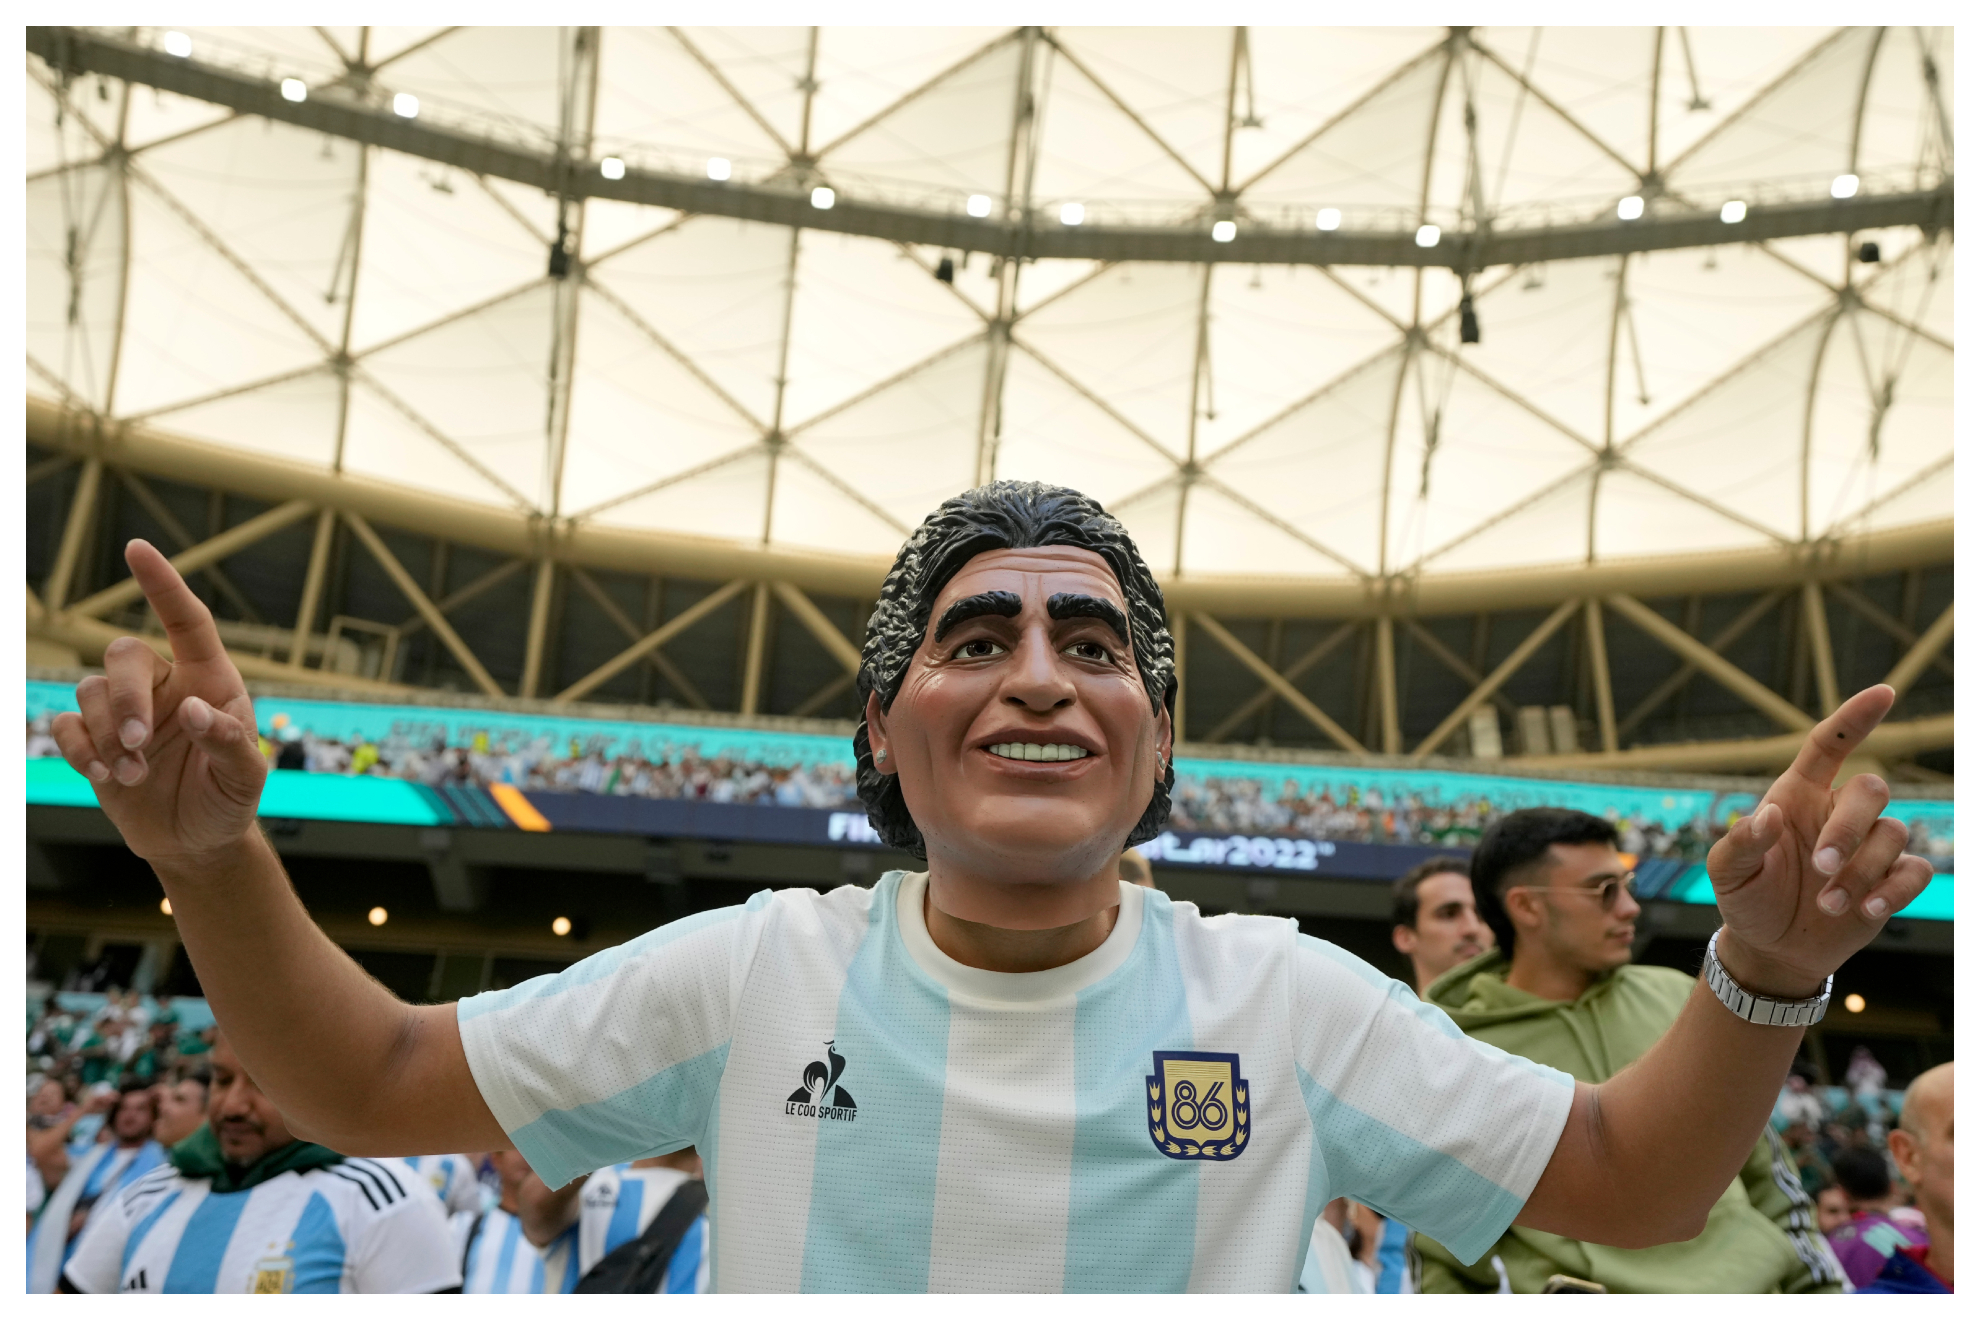 Argentina is praying ahead of key Mexico clash and for Maradona's second anniversary